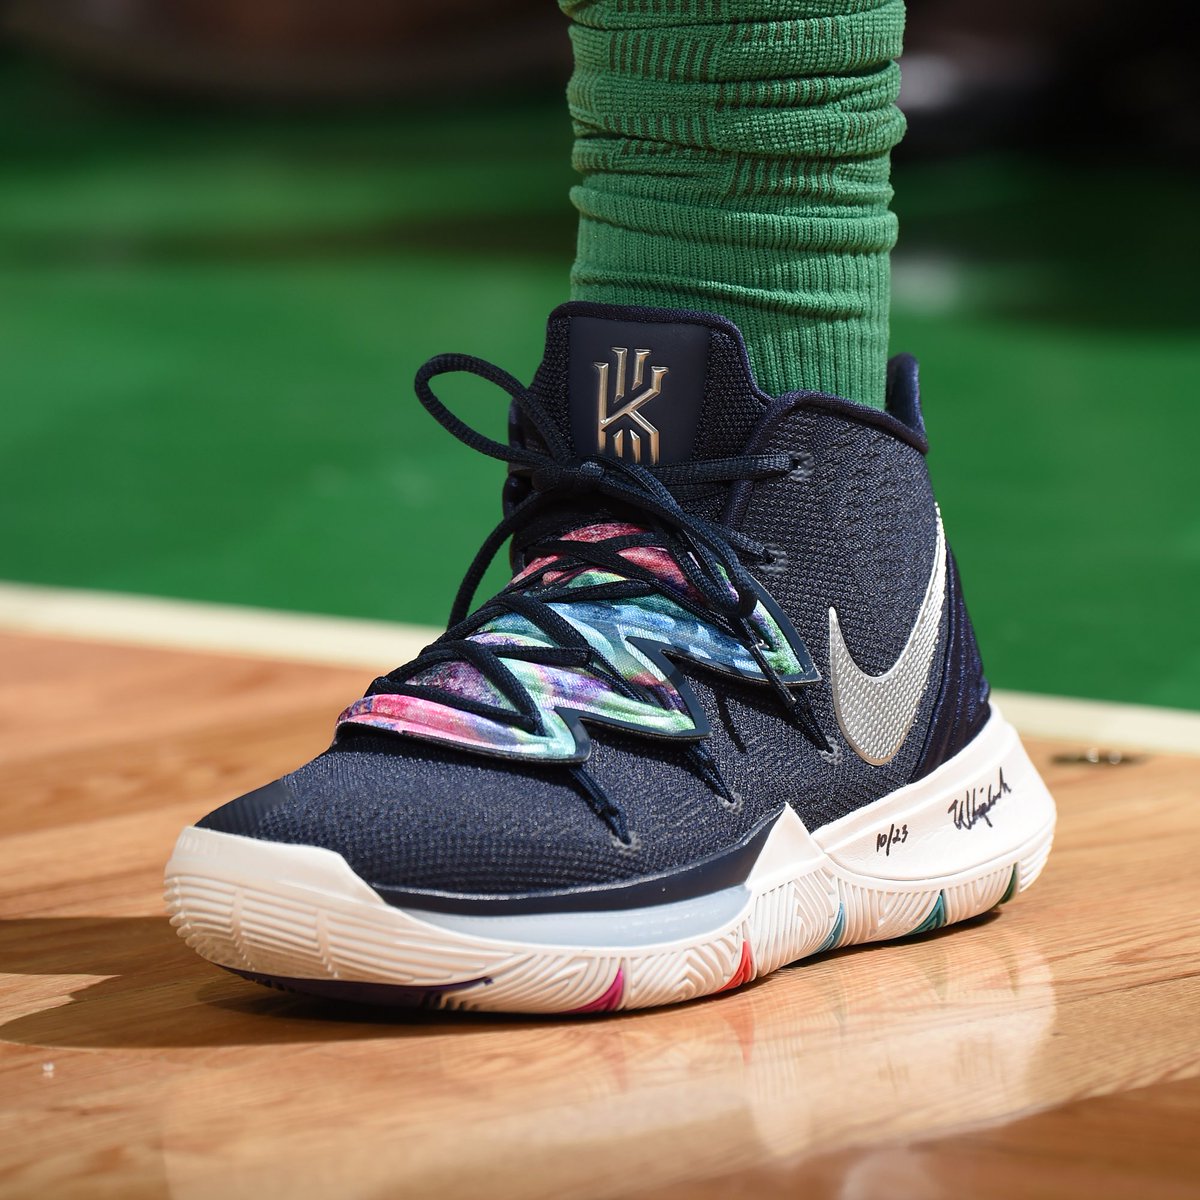 kyrie 5 signature Kyrie Irving shoes on sale Penta Byg